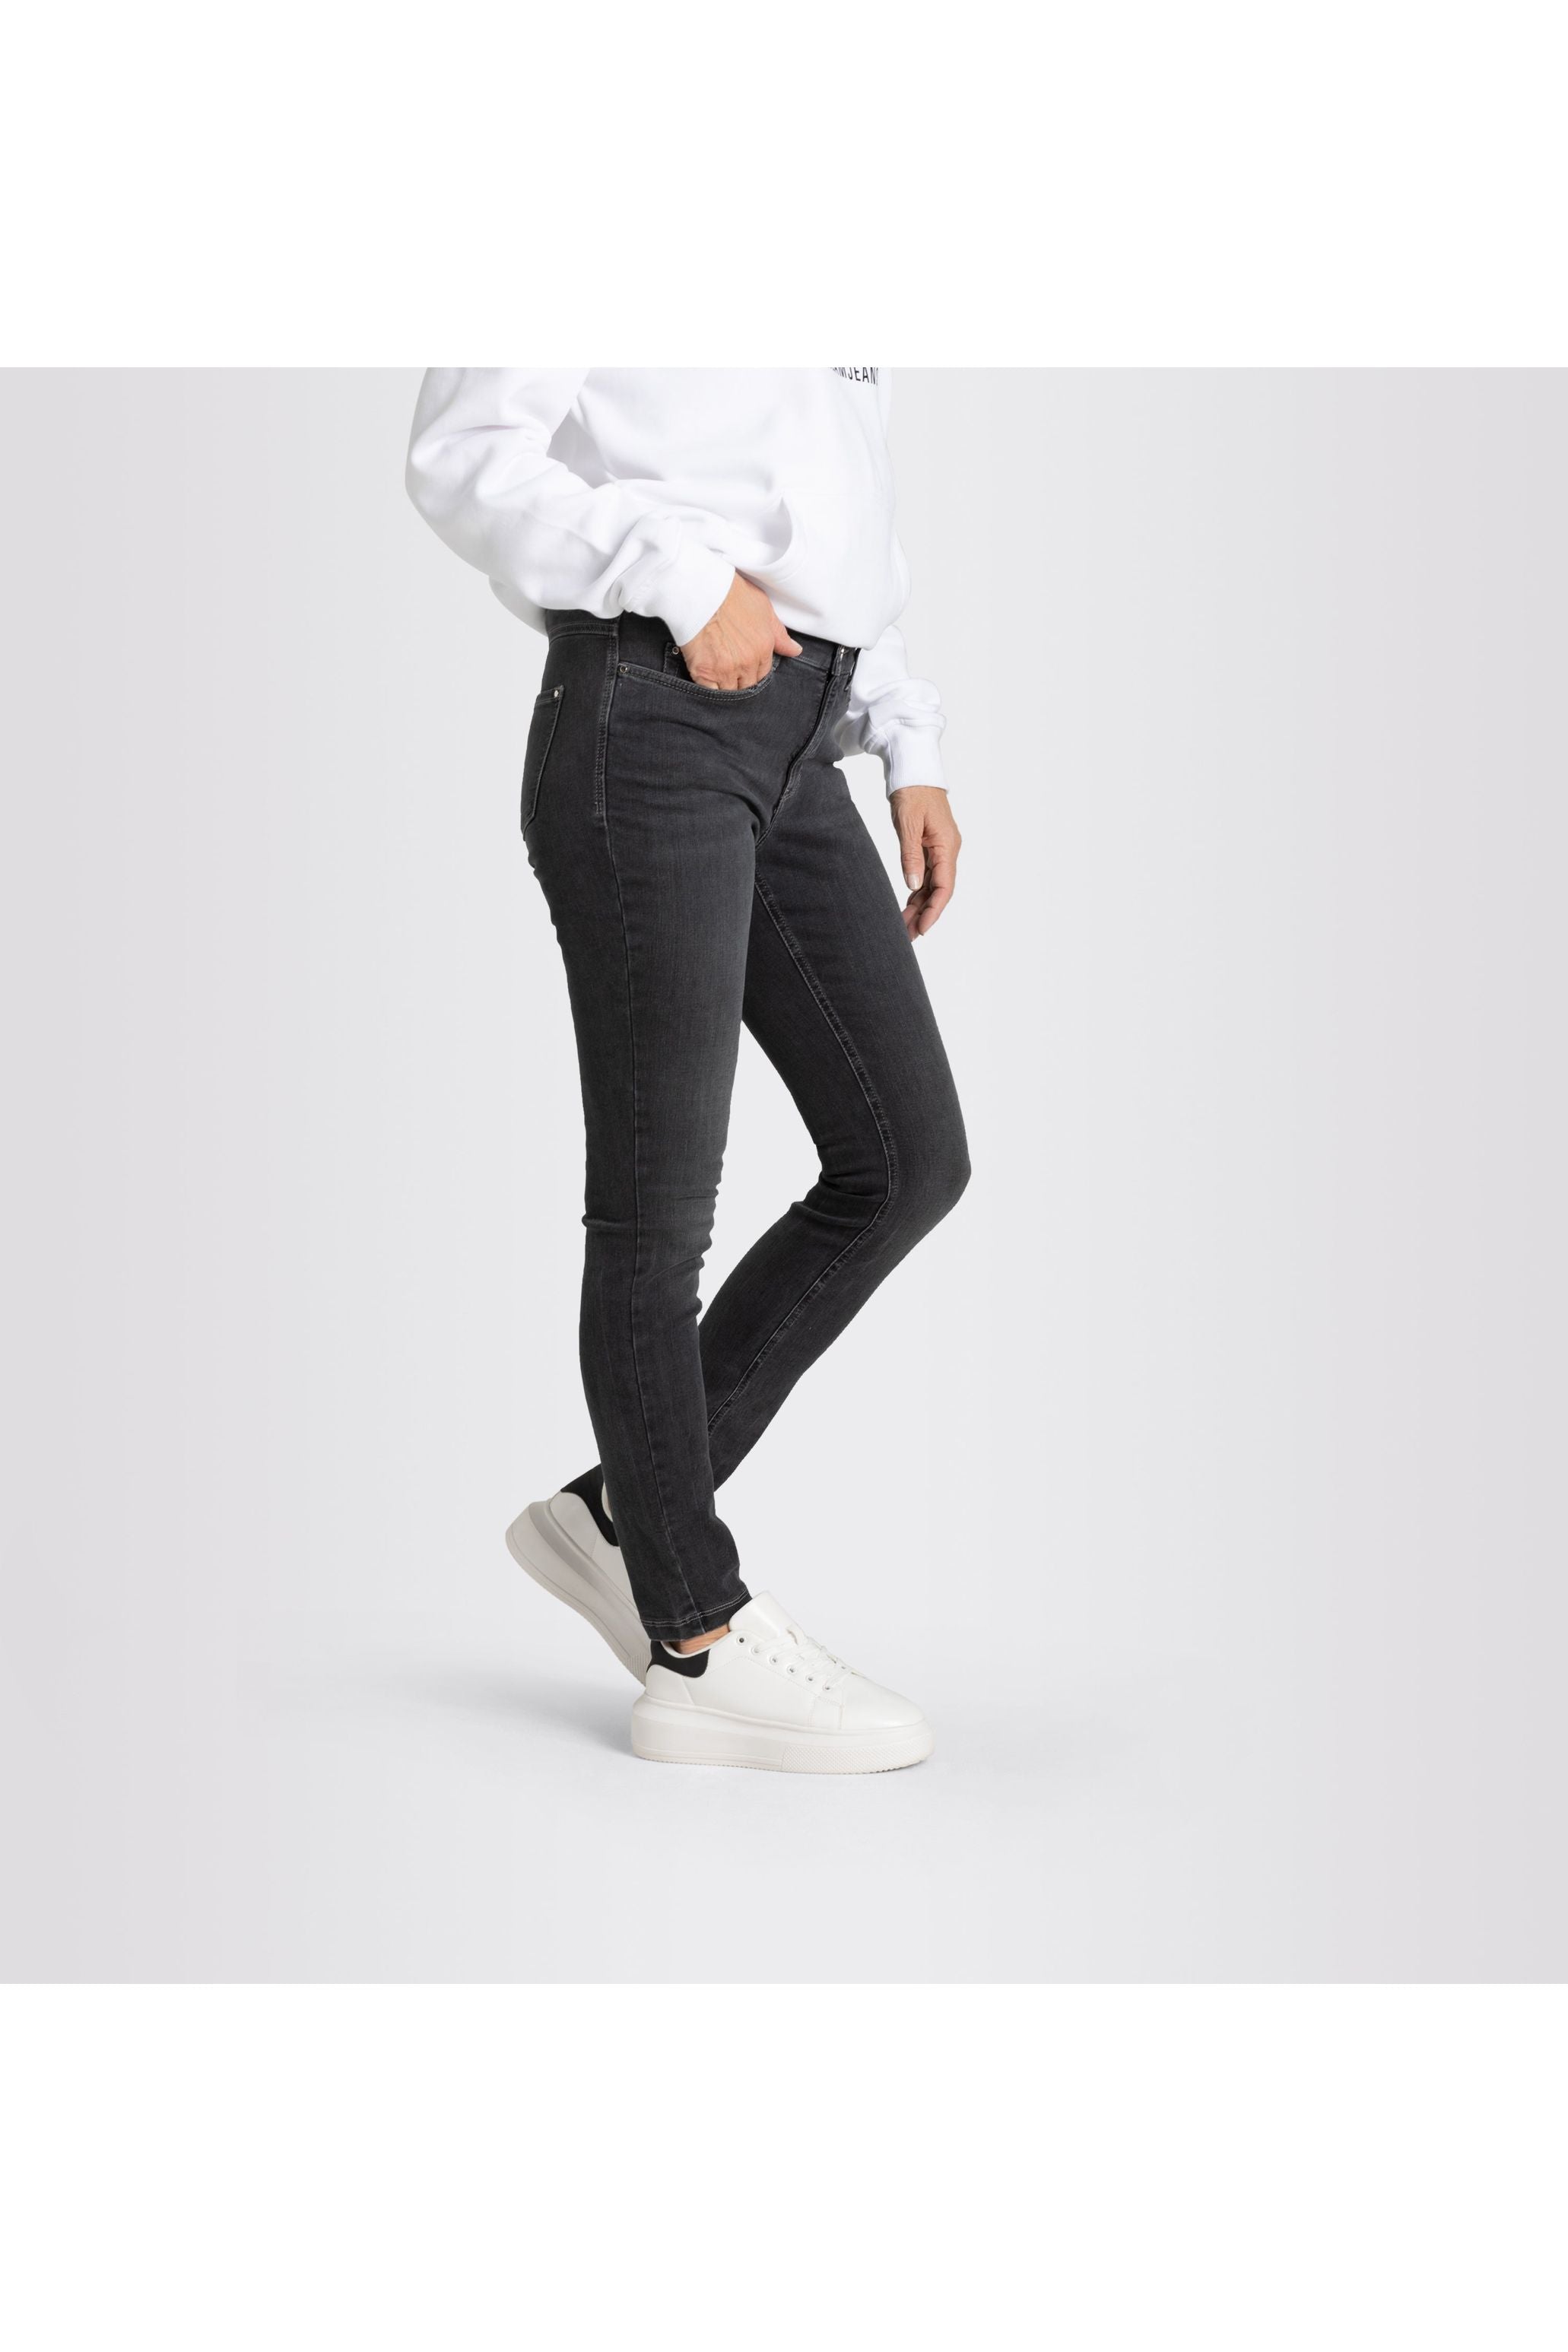 Jeans Dream Skinny Authentic | Ash Net Wash – Madison